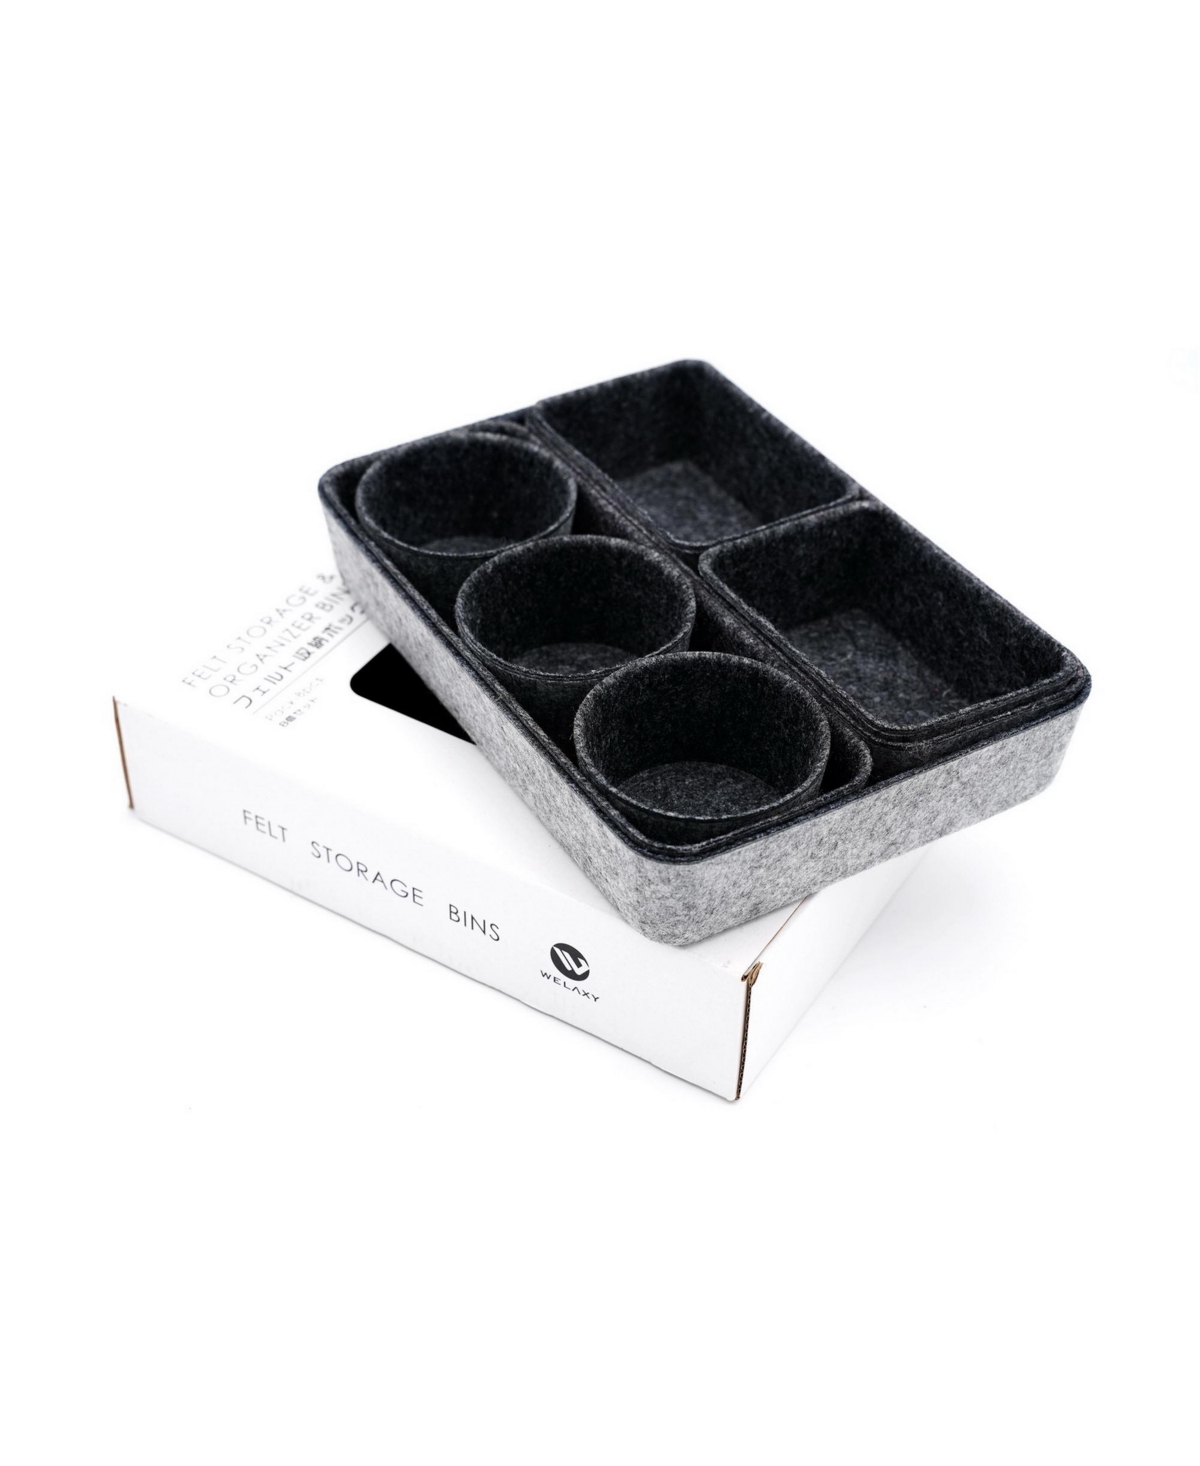 Welaxy 8 Piece Felt Drawer Organizer Set With Round Cups And Trays In Charcoal